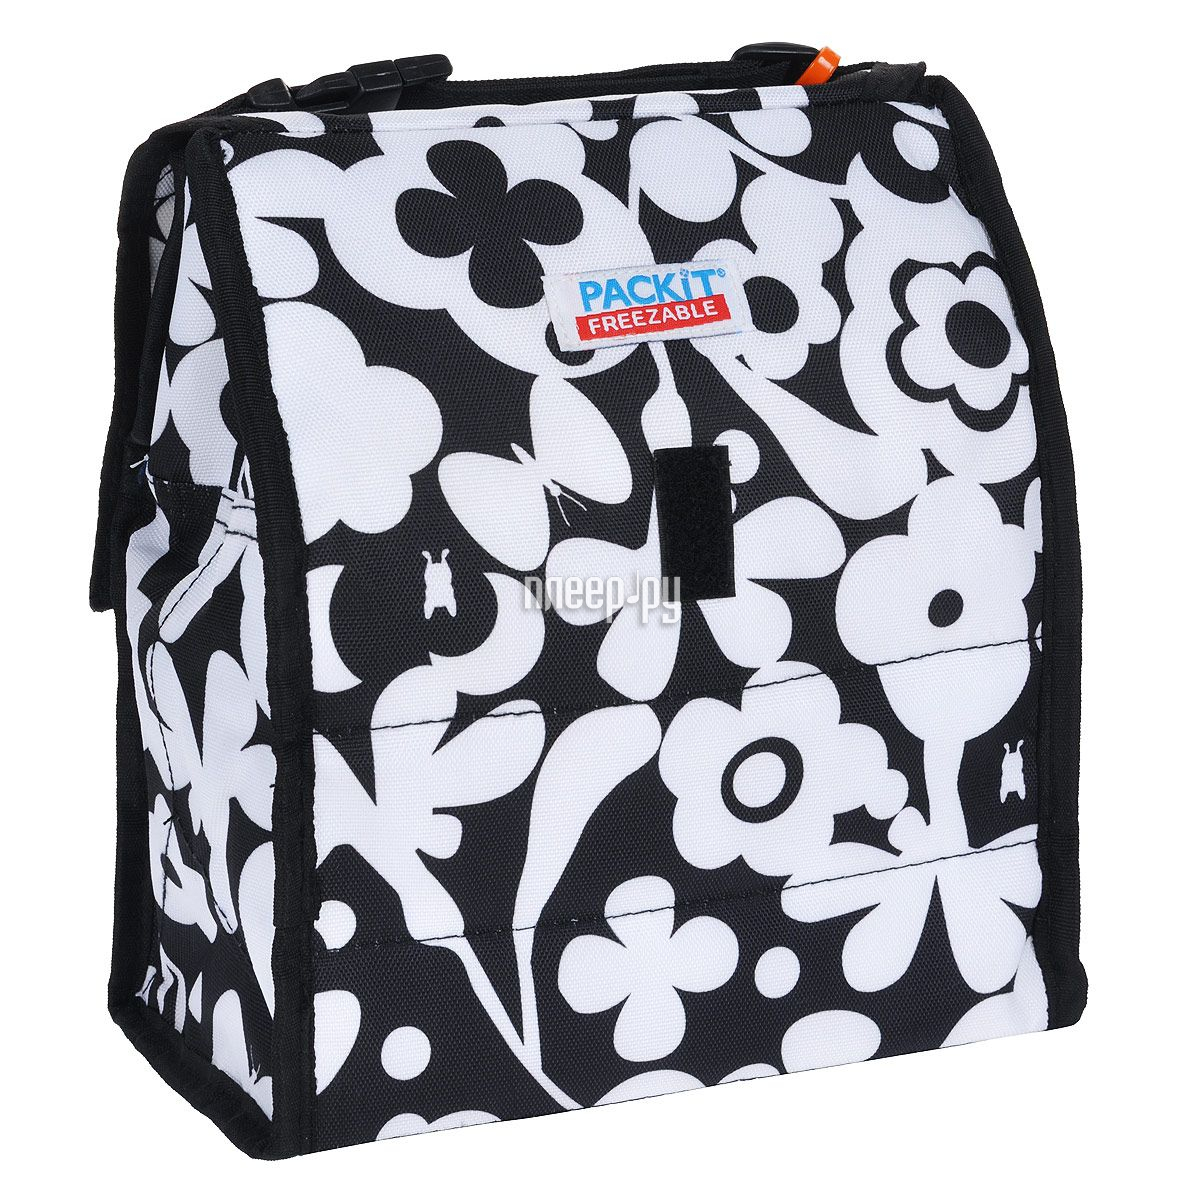  Packit Personal Cooler Black-White PKT-PC-CRU  1029 